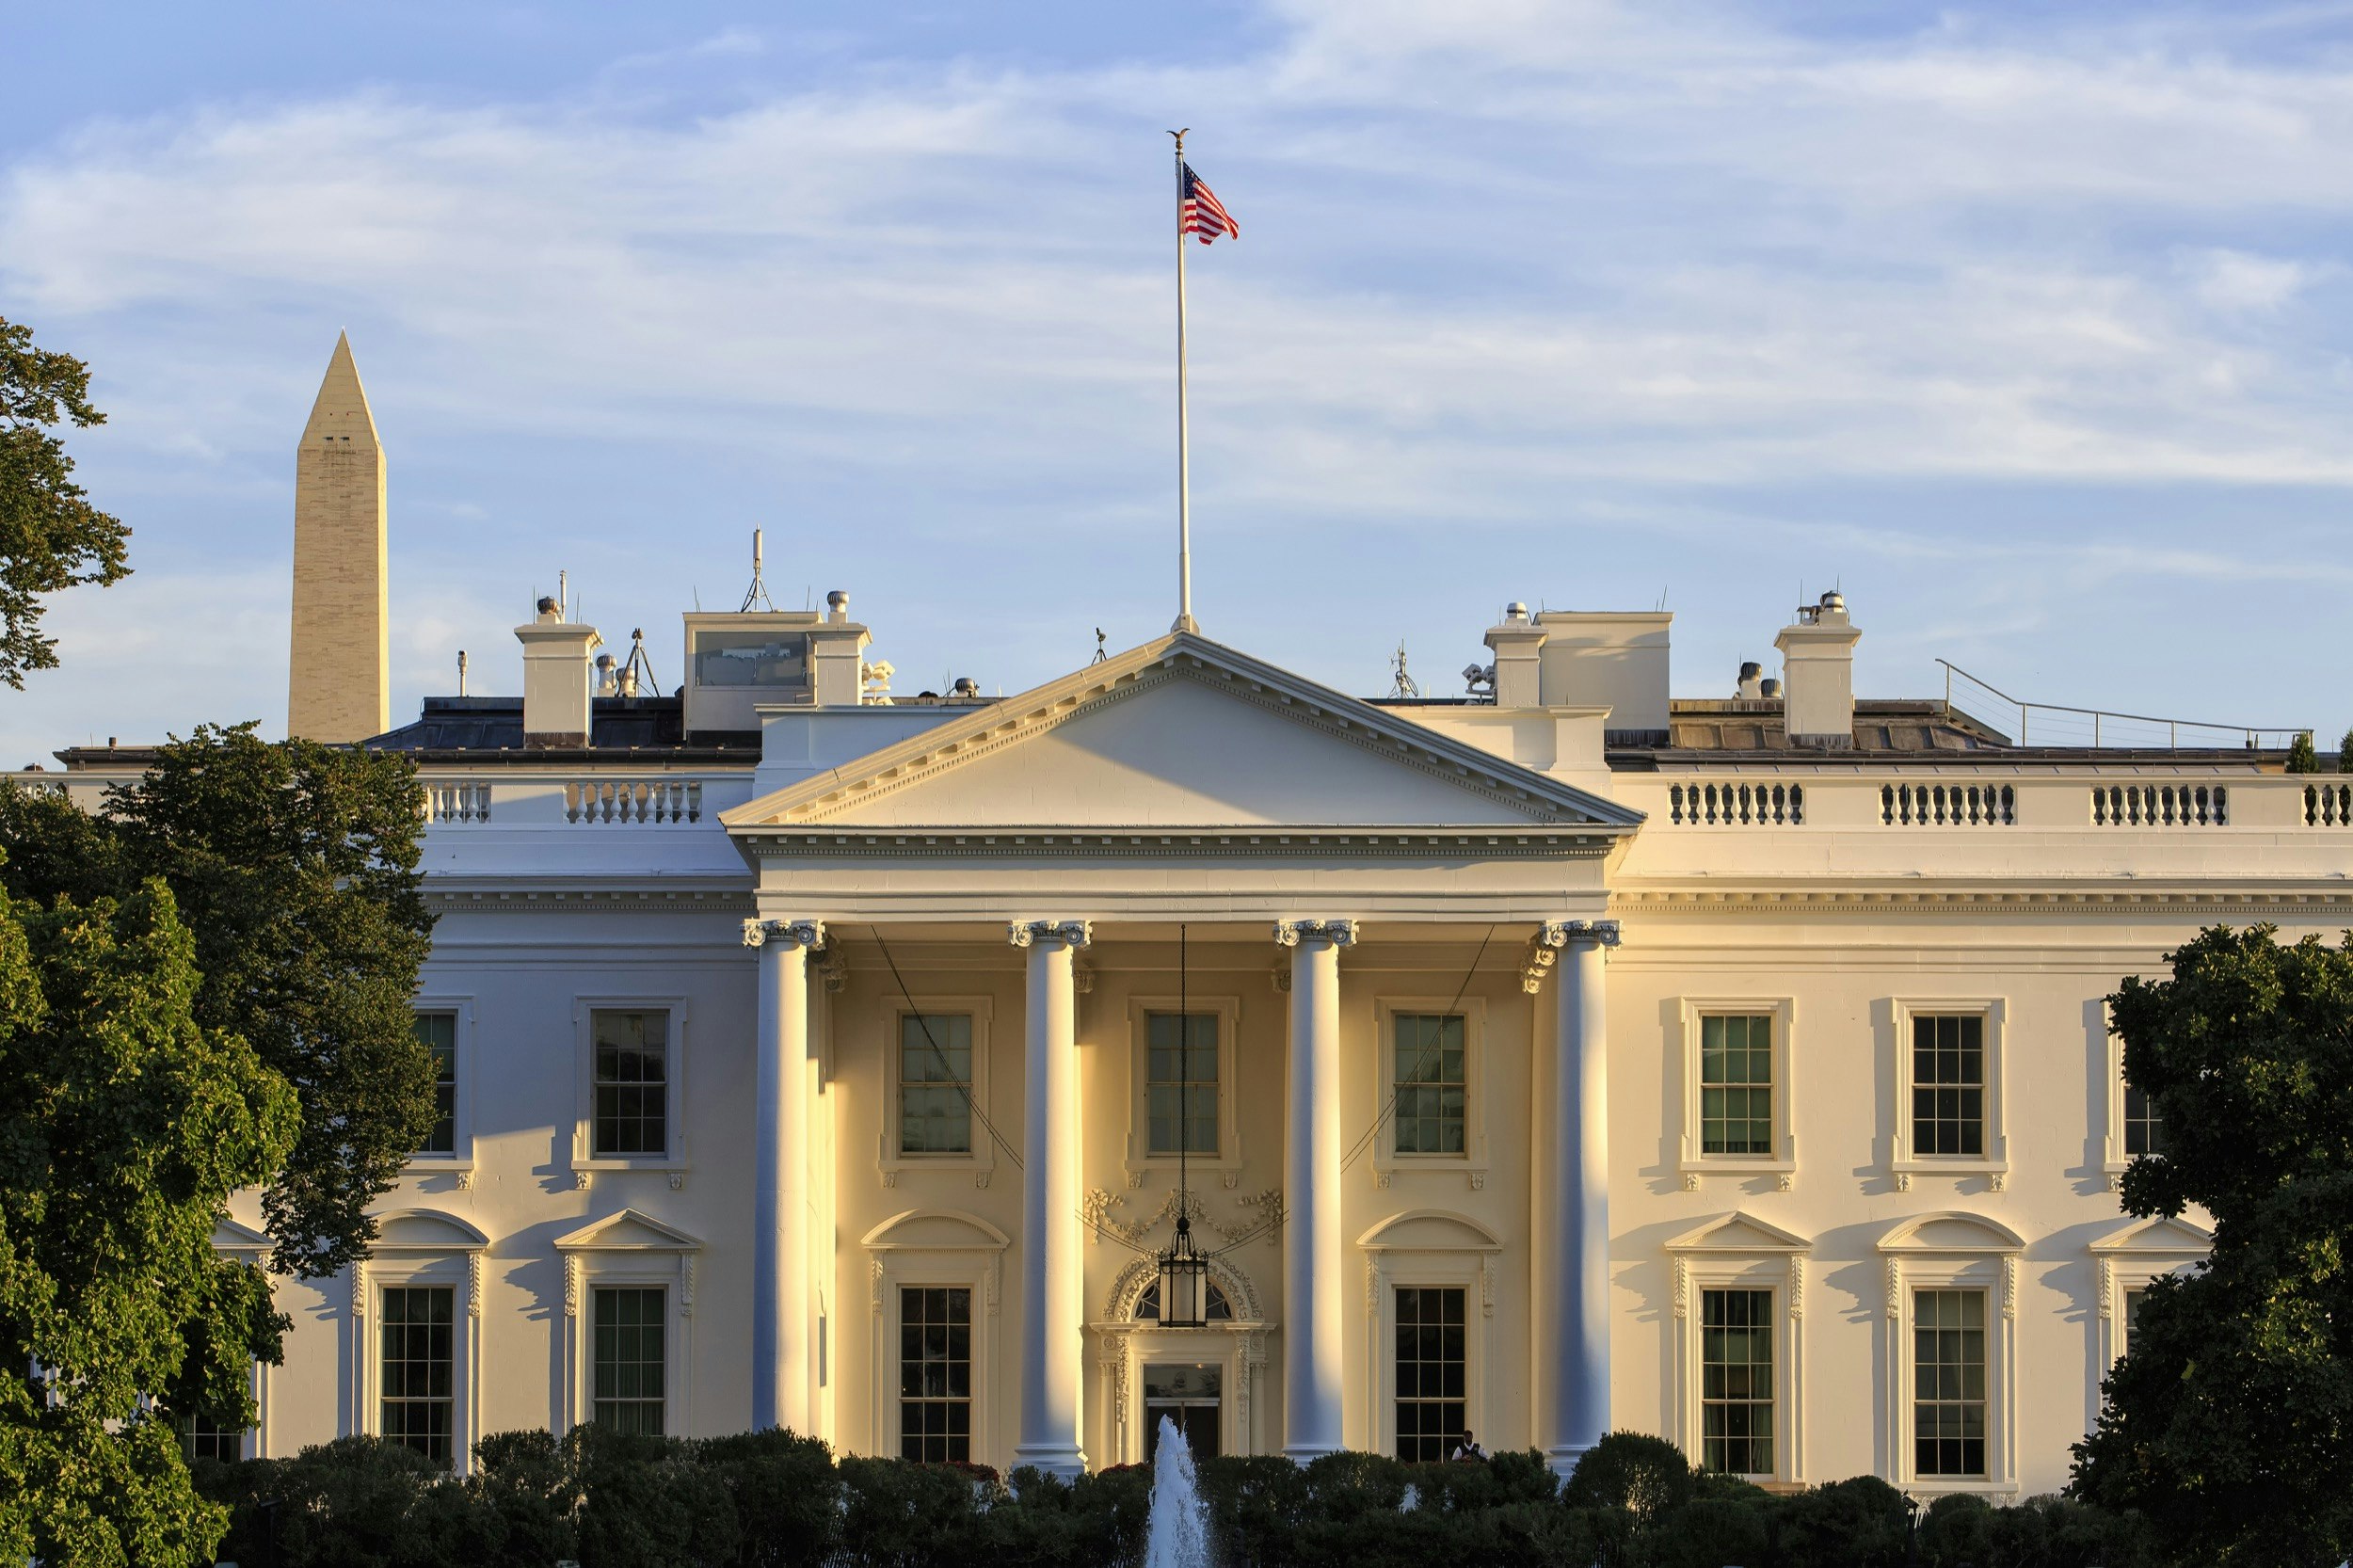 The front portico of the White House is seen in early evening, with the Washington Monument poking up behind; Best American architecture